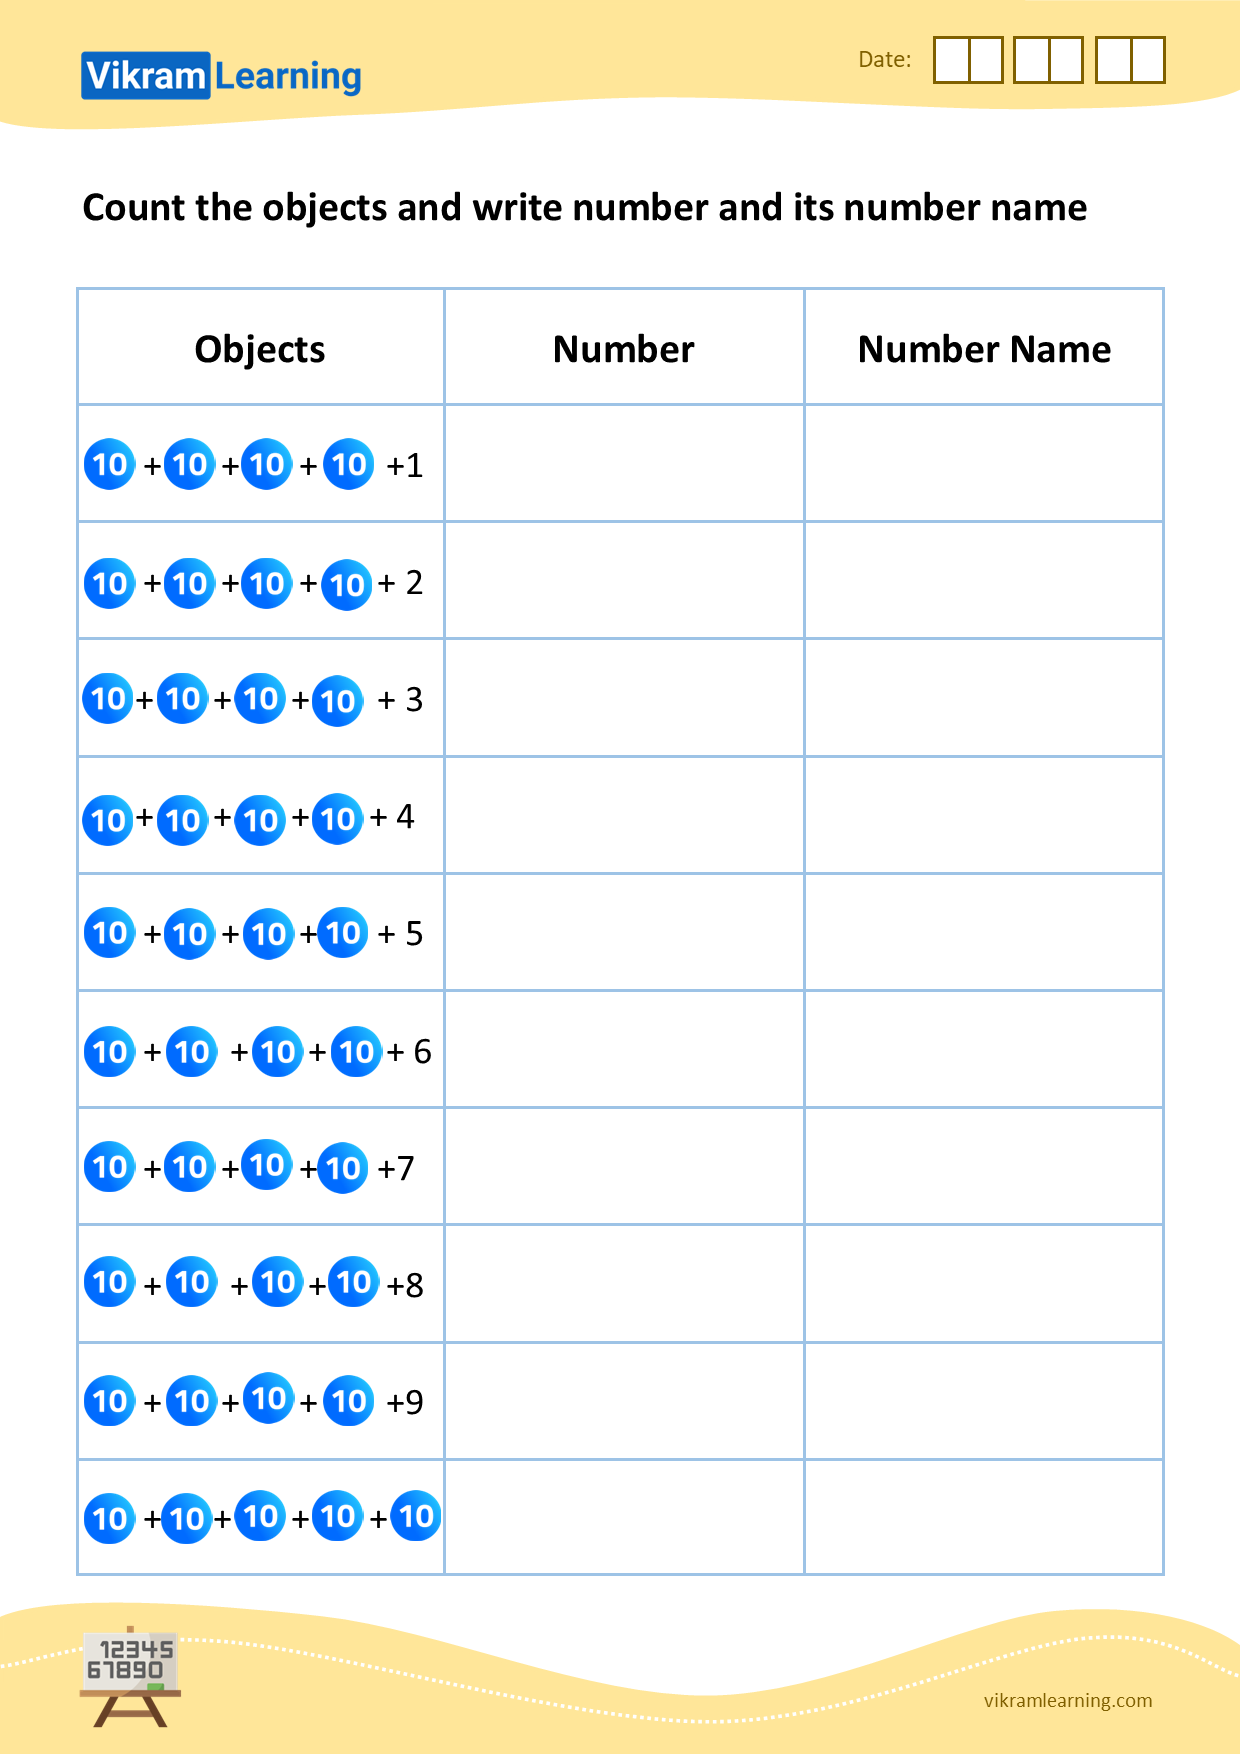 Download count the objects and write number and its number name - 1 worksheets